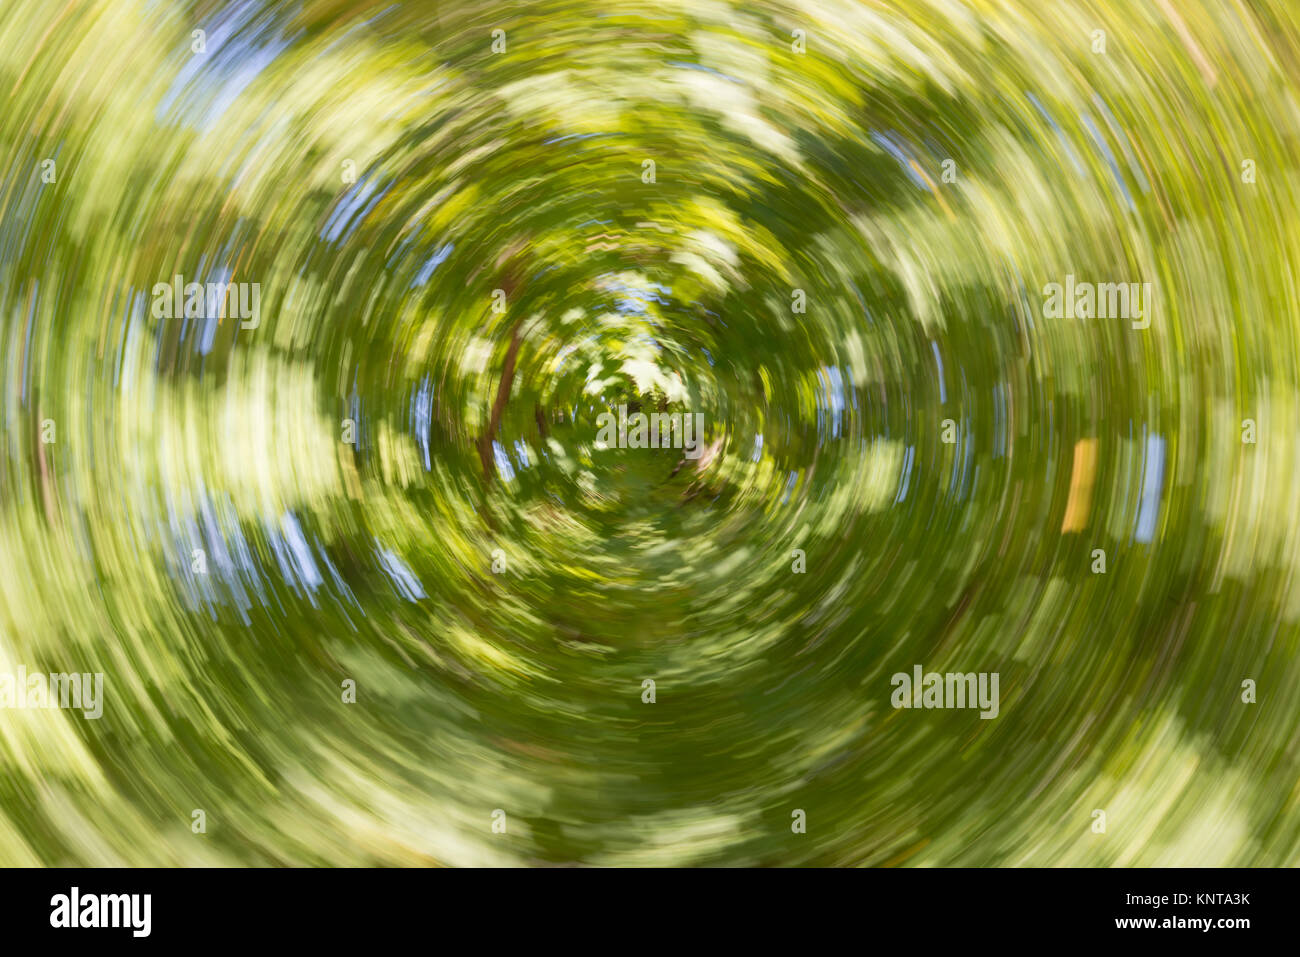 Abstract of a tree using zoom and twist. Green with swirl. Stock Photo